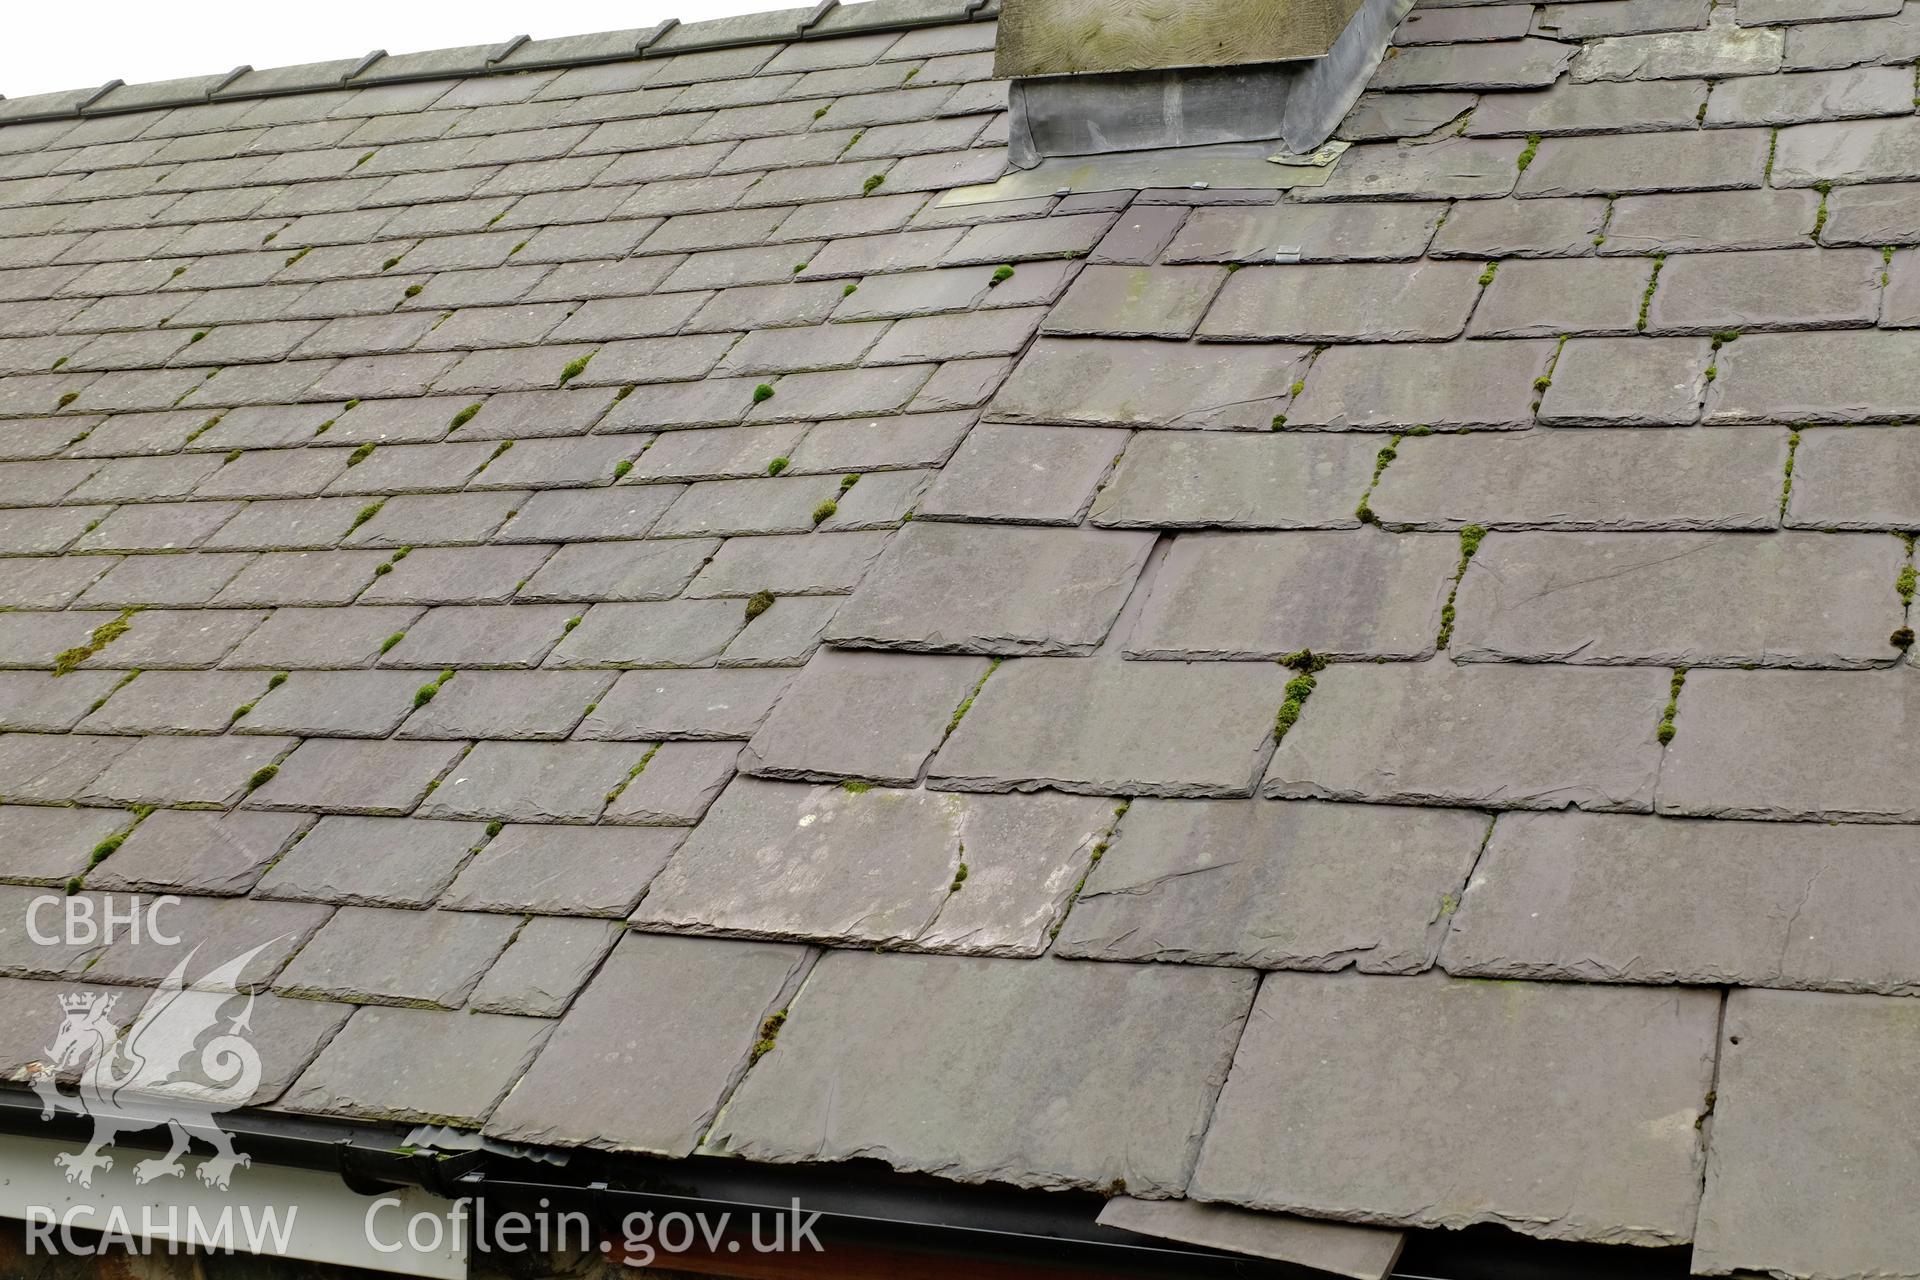 Colour photograph showing roof slates on the houses at Penbryn Terrace, Bethesda, produced by Richard Hayman 2nd March 2017